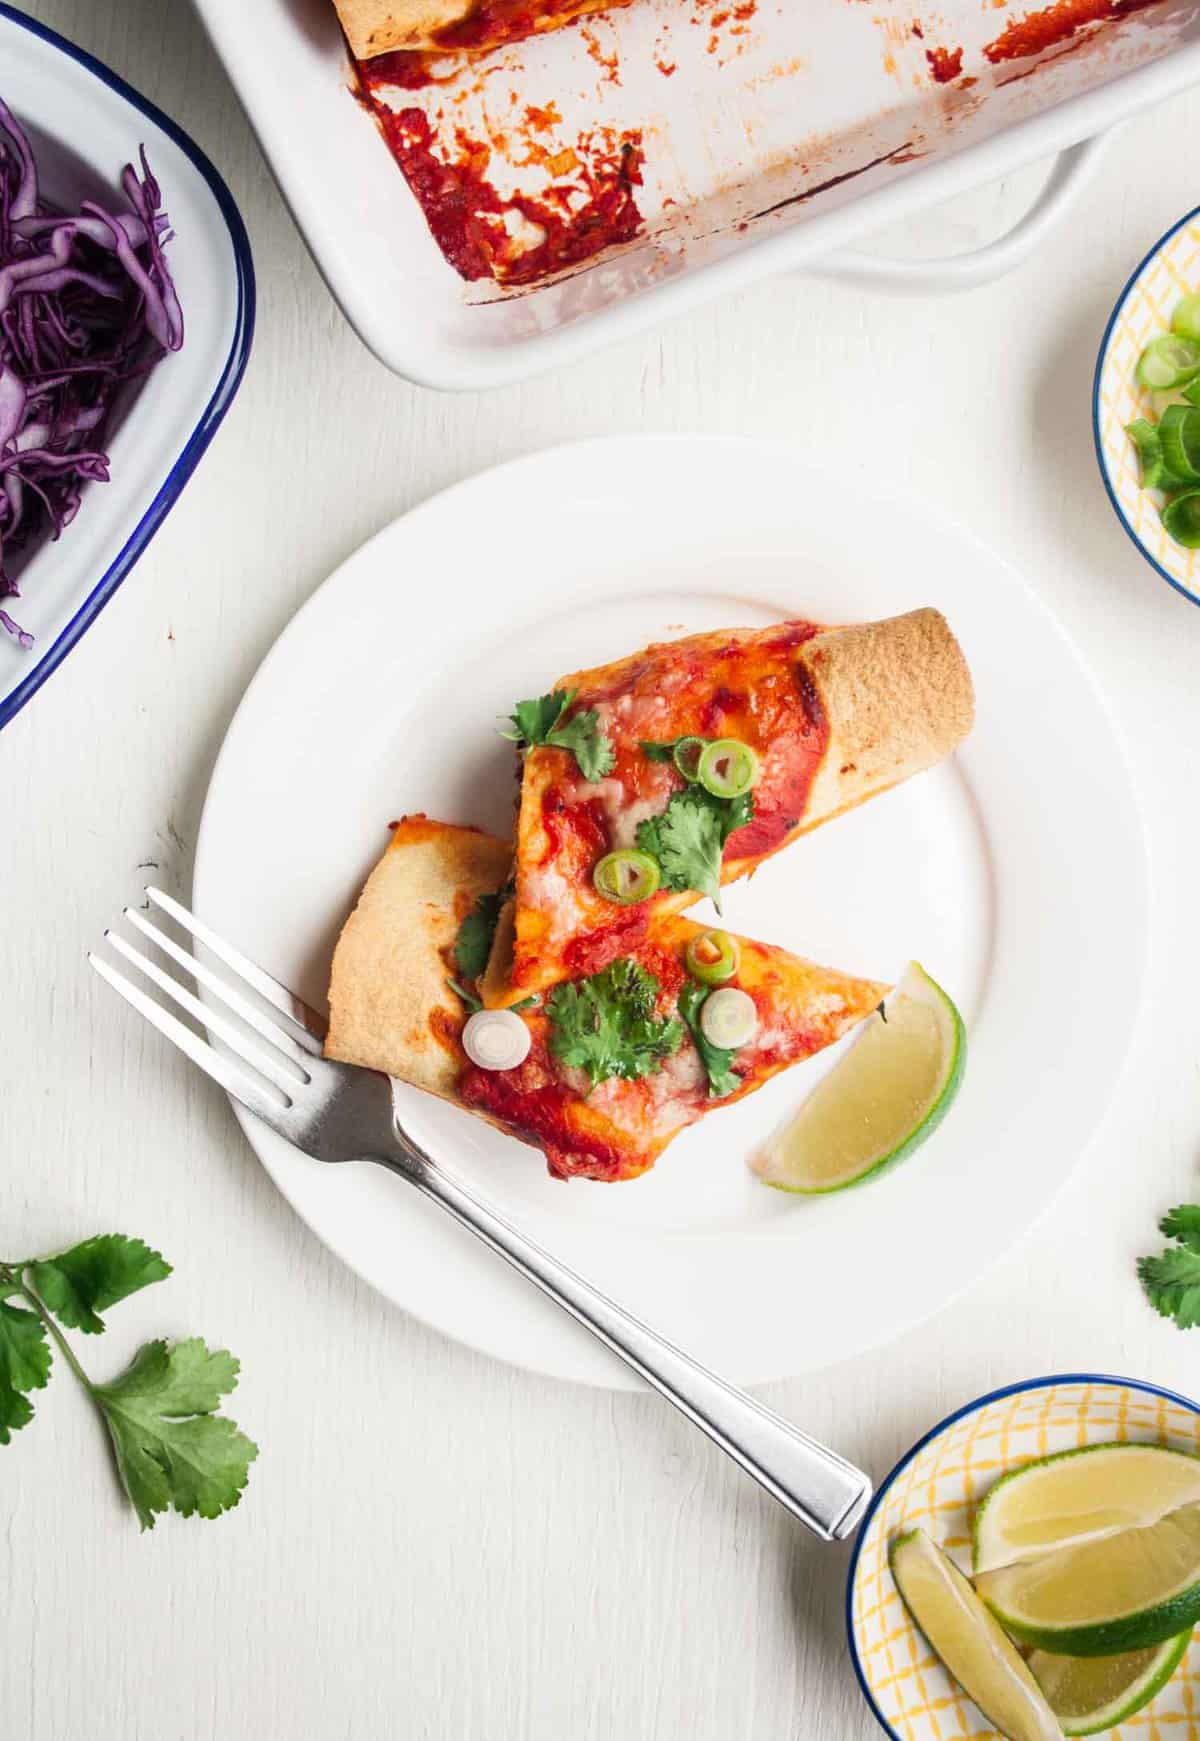 Chicken Enchiladas with Brussels Sprouts and Kale - these hearty enchiladas are full of flavour and feature a simple homemade enchilada sauce and plenty of winter veggies | eatloveeats.com